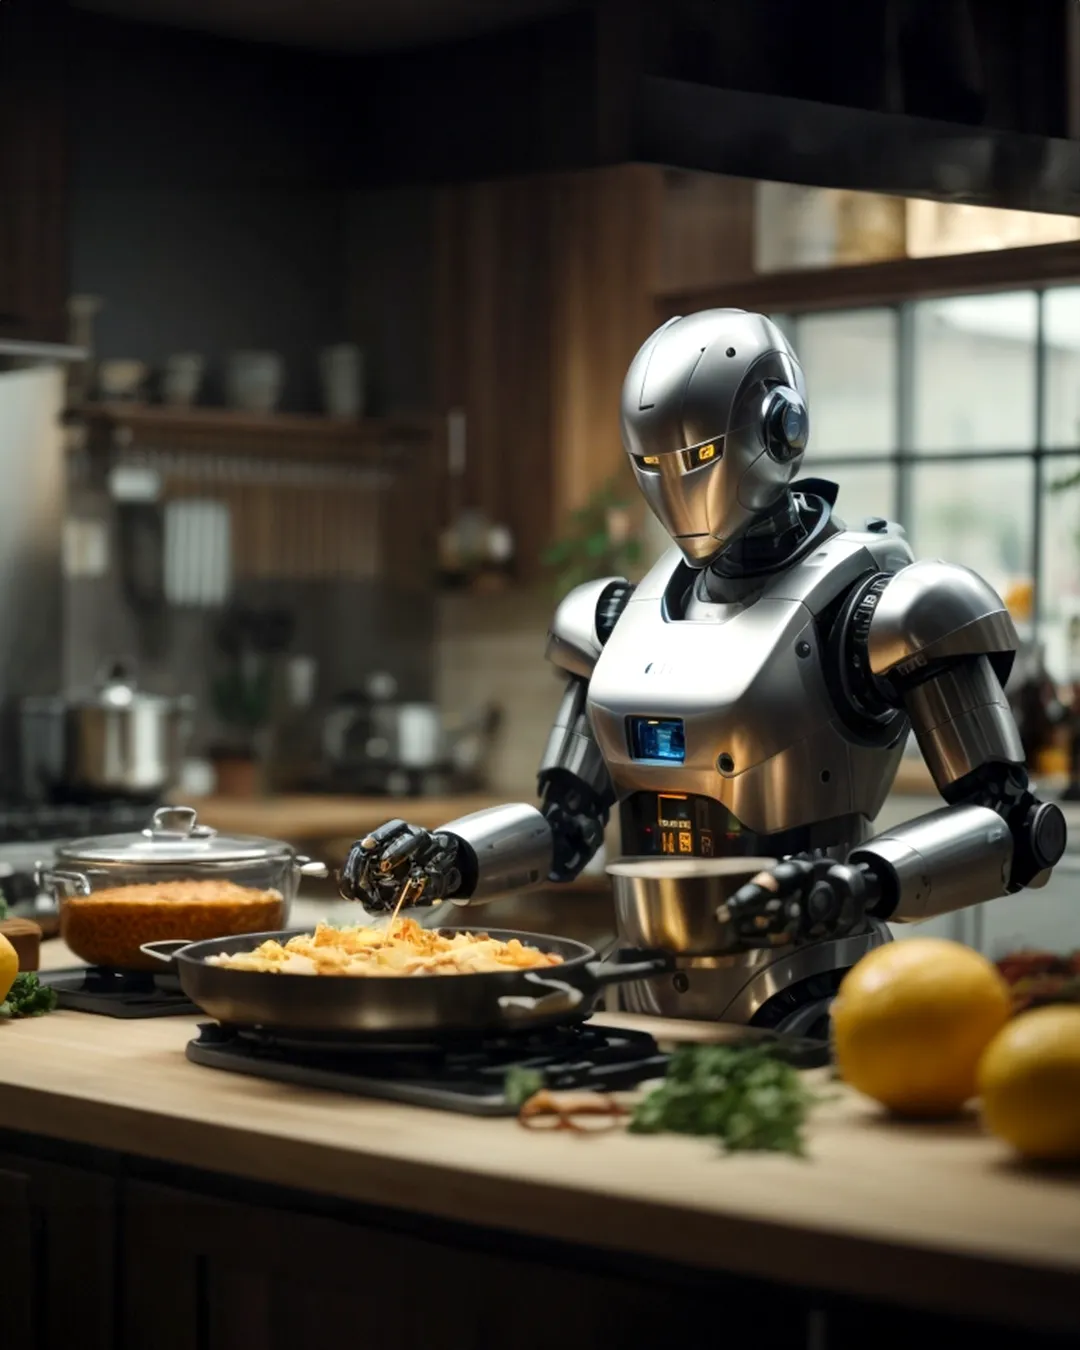 Nosh: Redefining Home Cooking with AI-Powered Robots